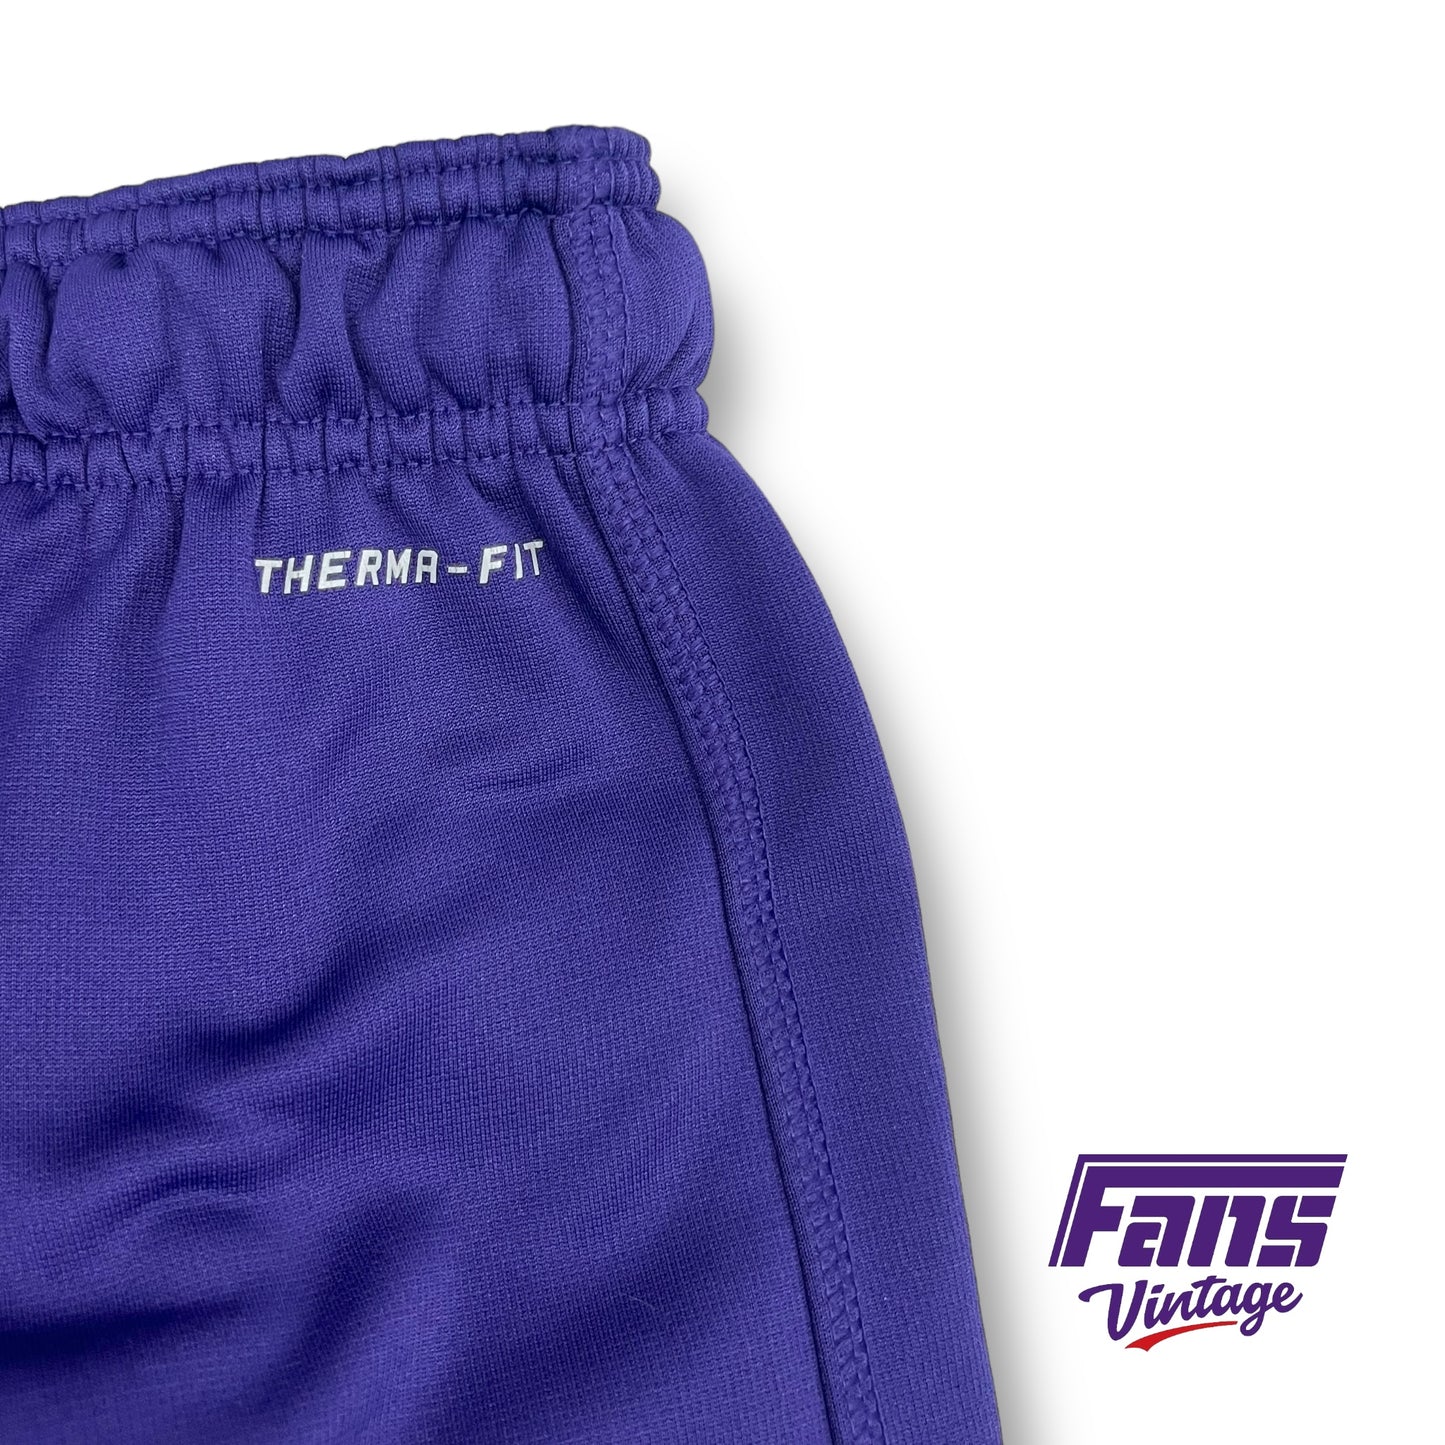 Nike TCU Team Issue Strength & Conditioning Nike Thermafit Sweatpants